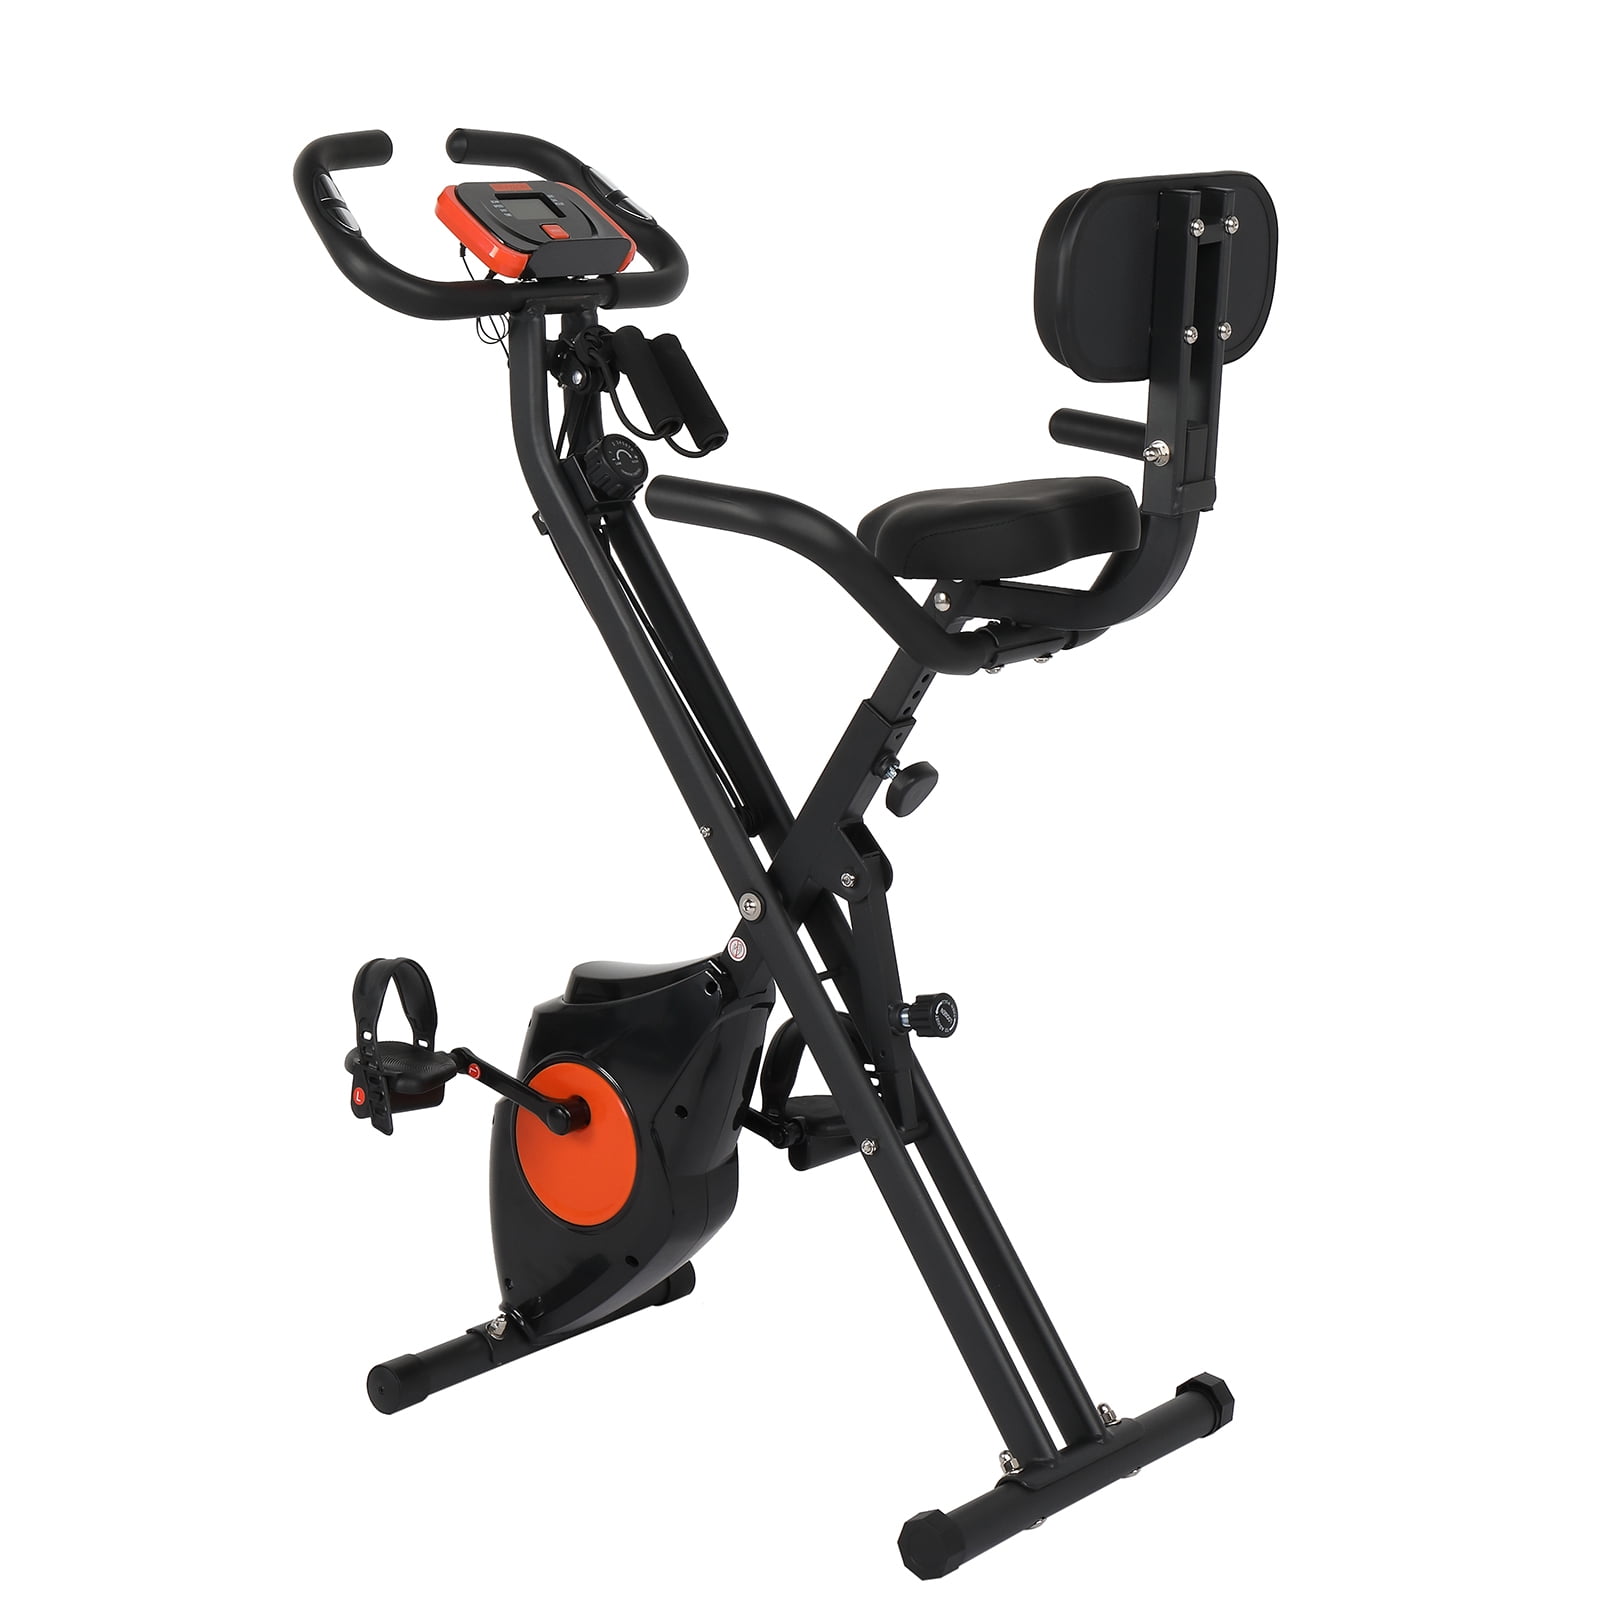 Details about   Folding Stationary Upright Indoor Resistance Cycling Exercise Bike Gym Workout U 